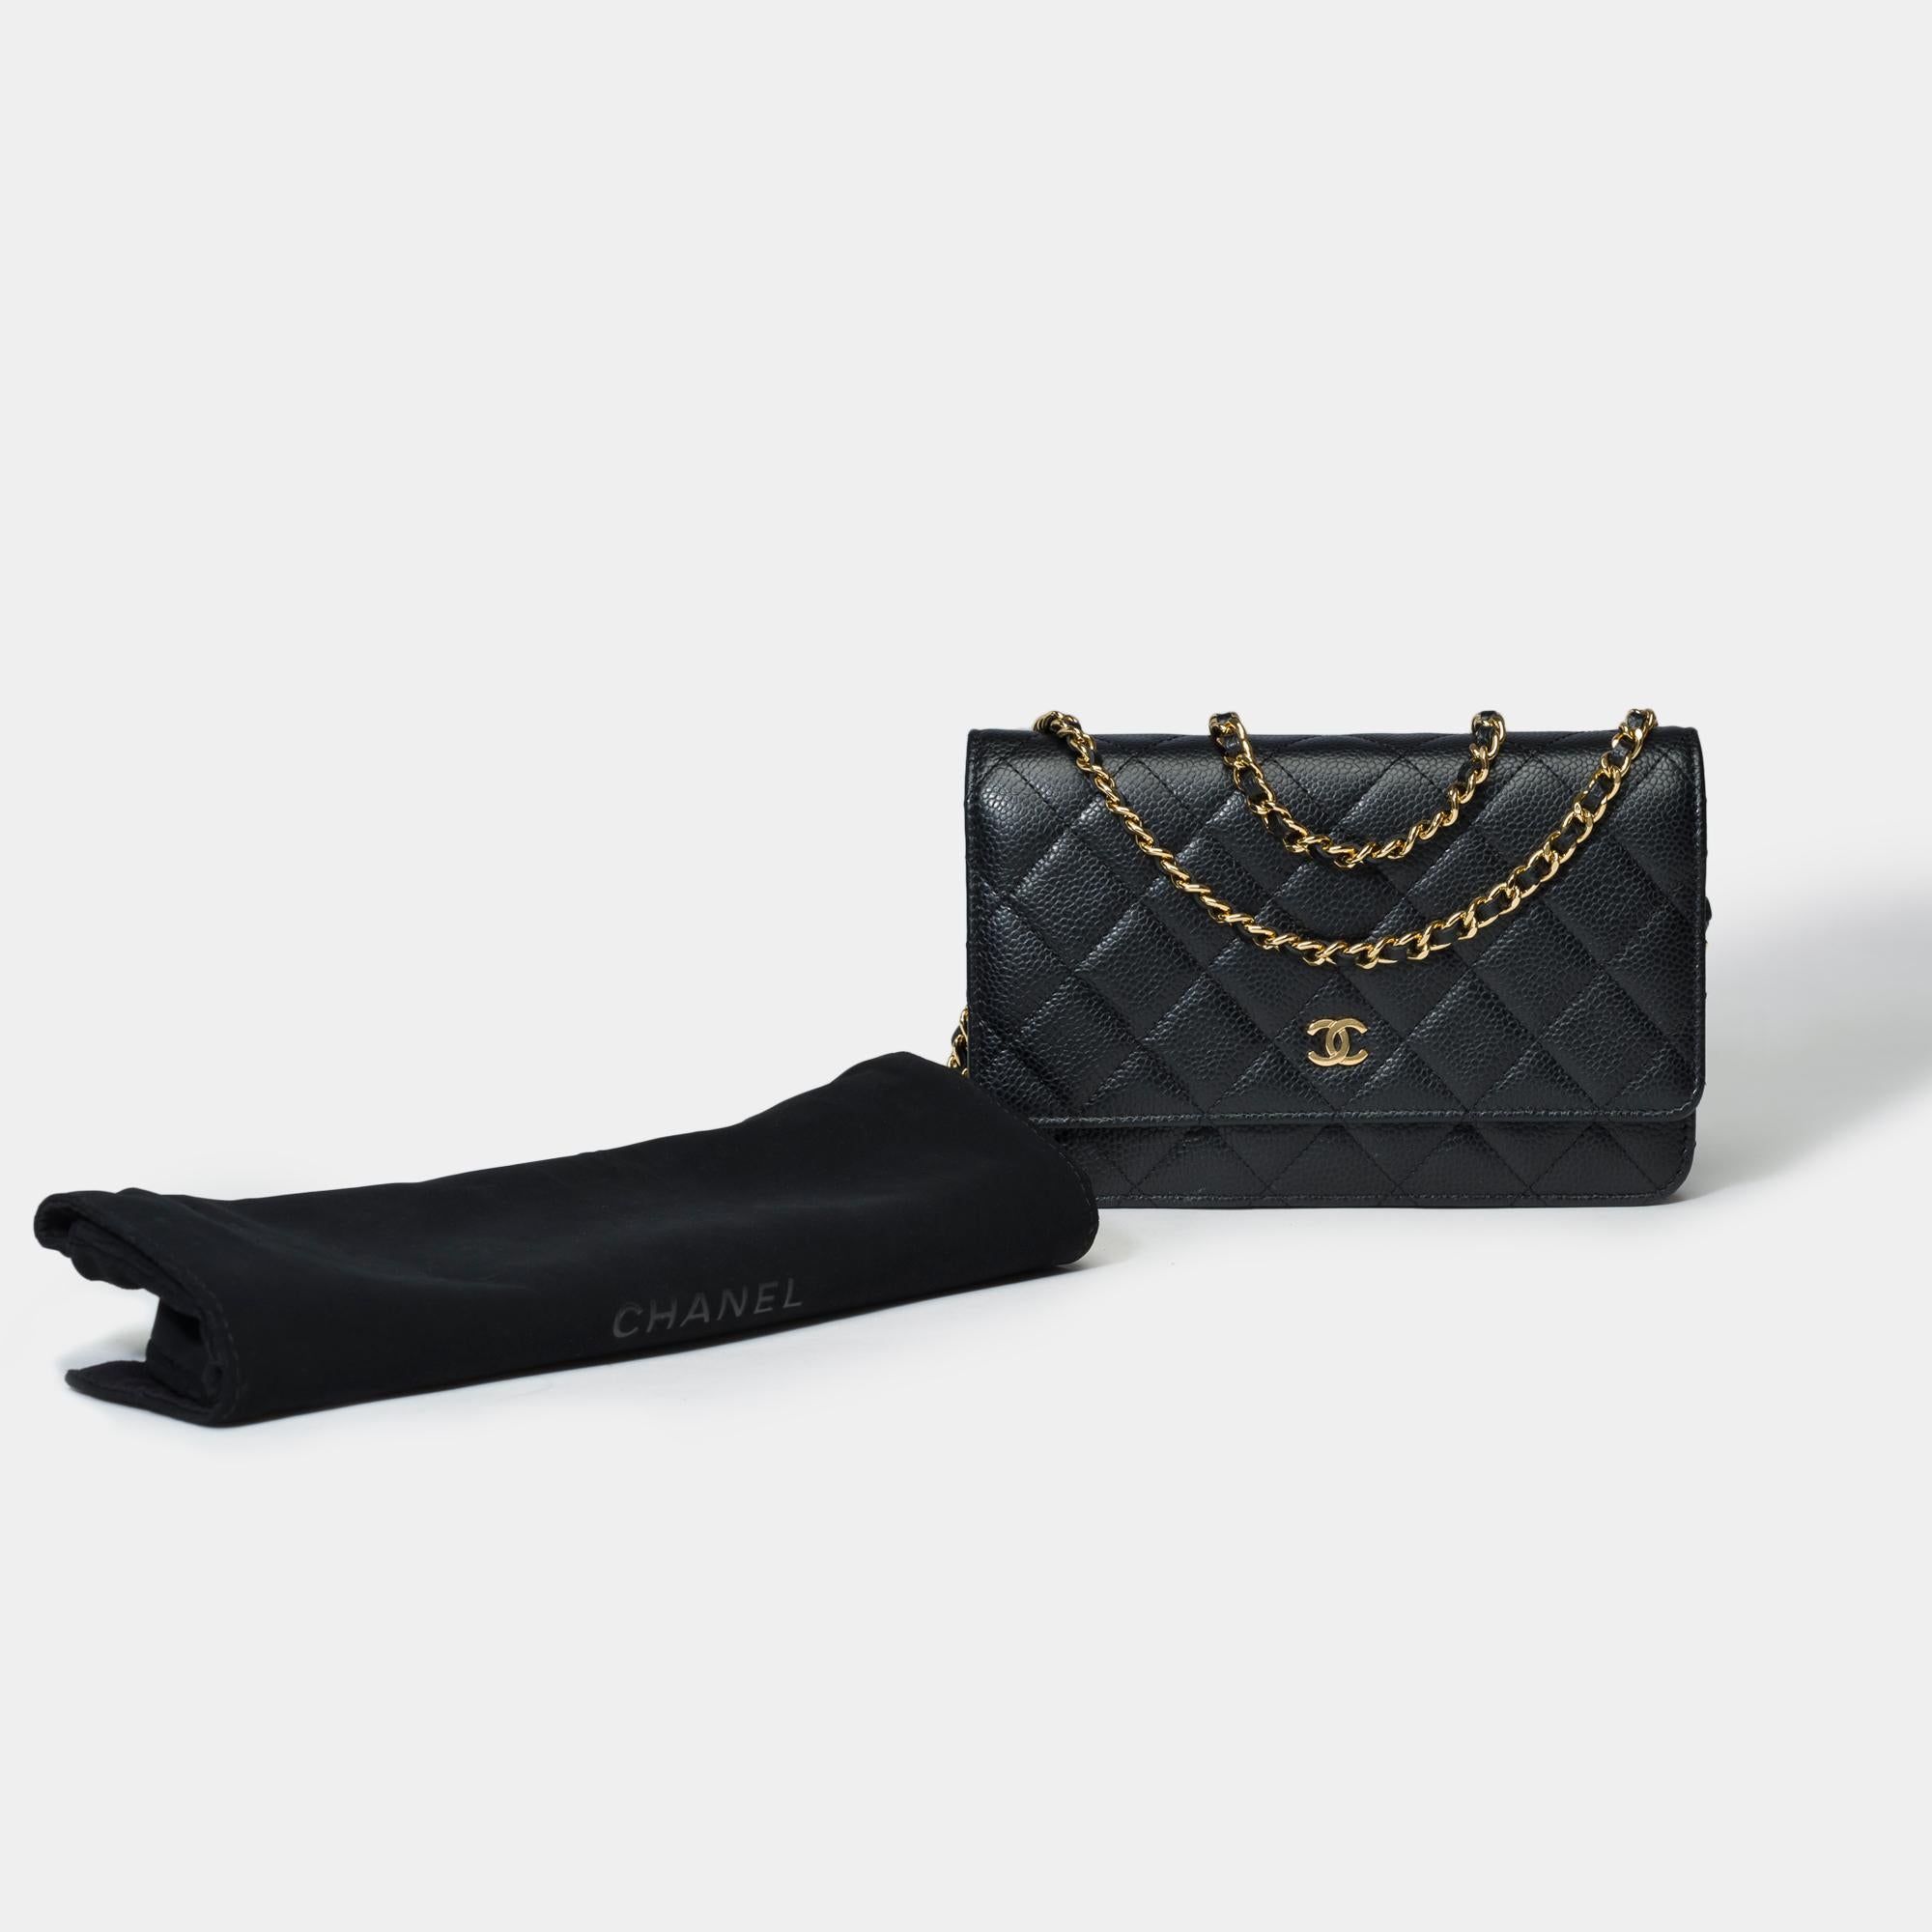 Lovely​ ​Chanel​ ​Wallet​ ​On​ ​Chain(WOC)​ ​shoulder​ ​bag​ ​​ ​in​ ​black​ ​quilted​ ​caviar​ ​leather,​ ​gold​ ​metal​ ​trim,​ ​a​ ​gold​ ​metal​ ​chain​ ​handle​ ​interlaced​ ​with​ ​black​ ​leather​ ​allowing​ ​a​ ​shoulder​ ​or​ ​crossbody​